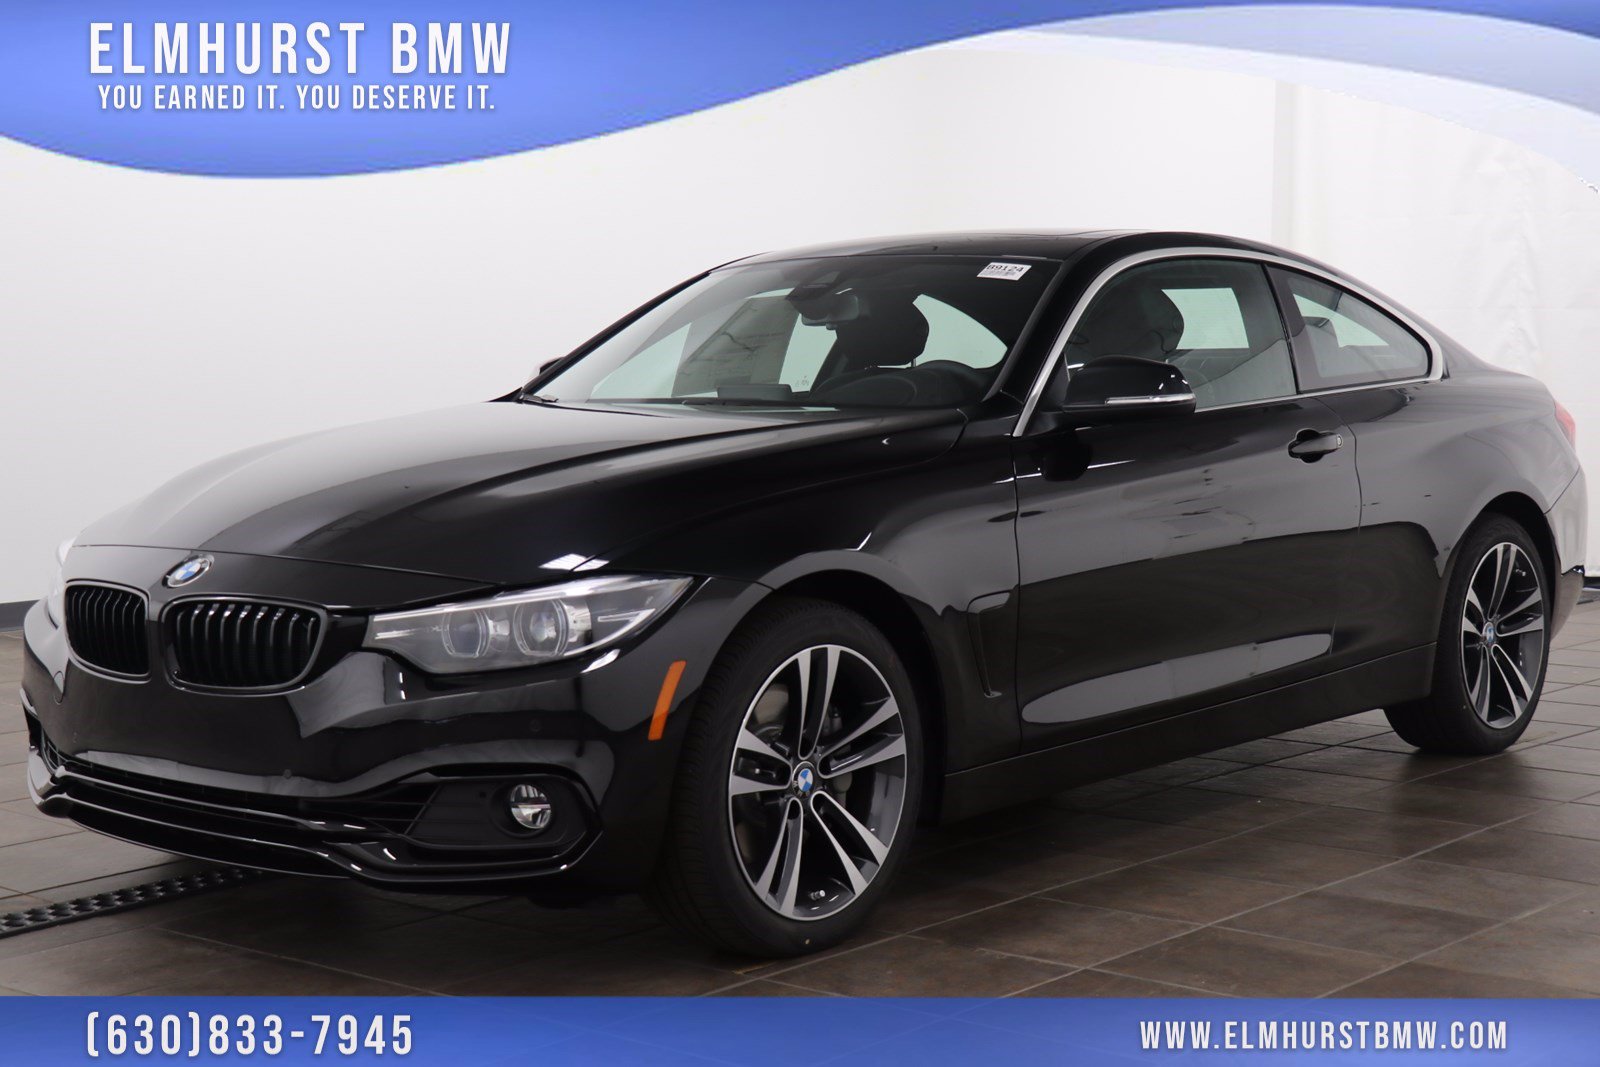 pre owned 2020 bmw 4 series 440i xdrive 2dr car in elmhurst b9124 elmhurst toyota pre owned 2020 bmw 4 series 440i xdrive